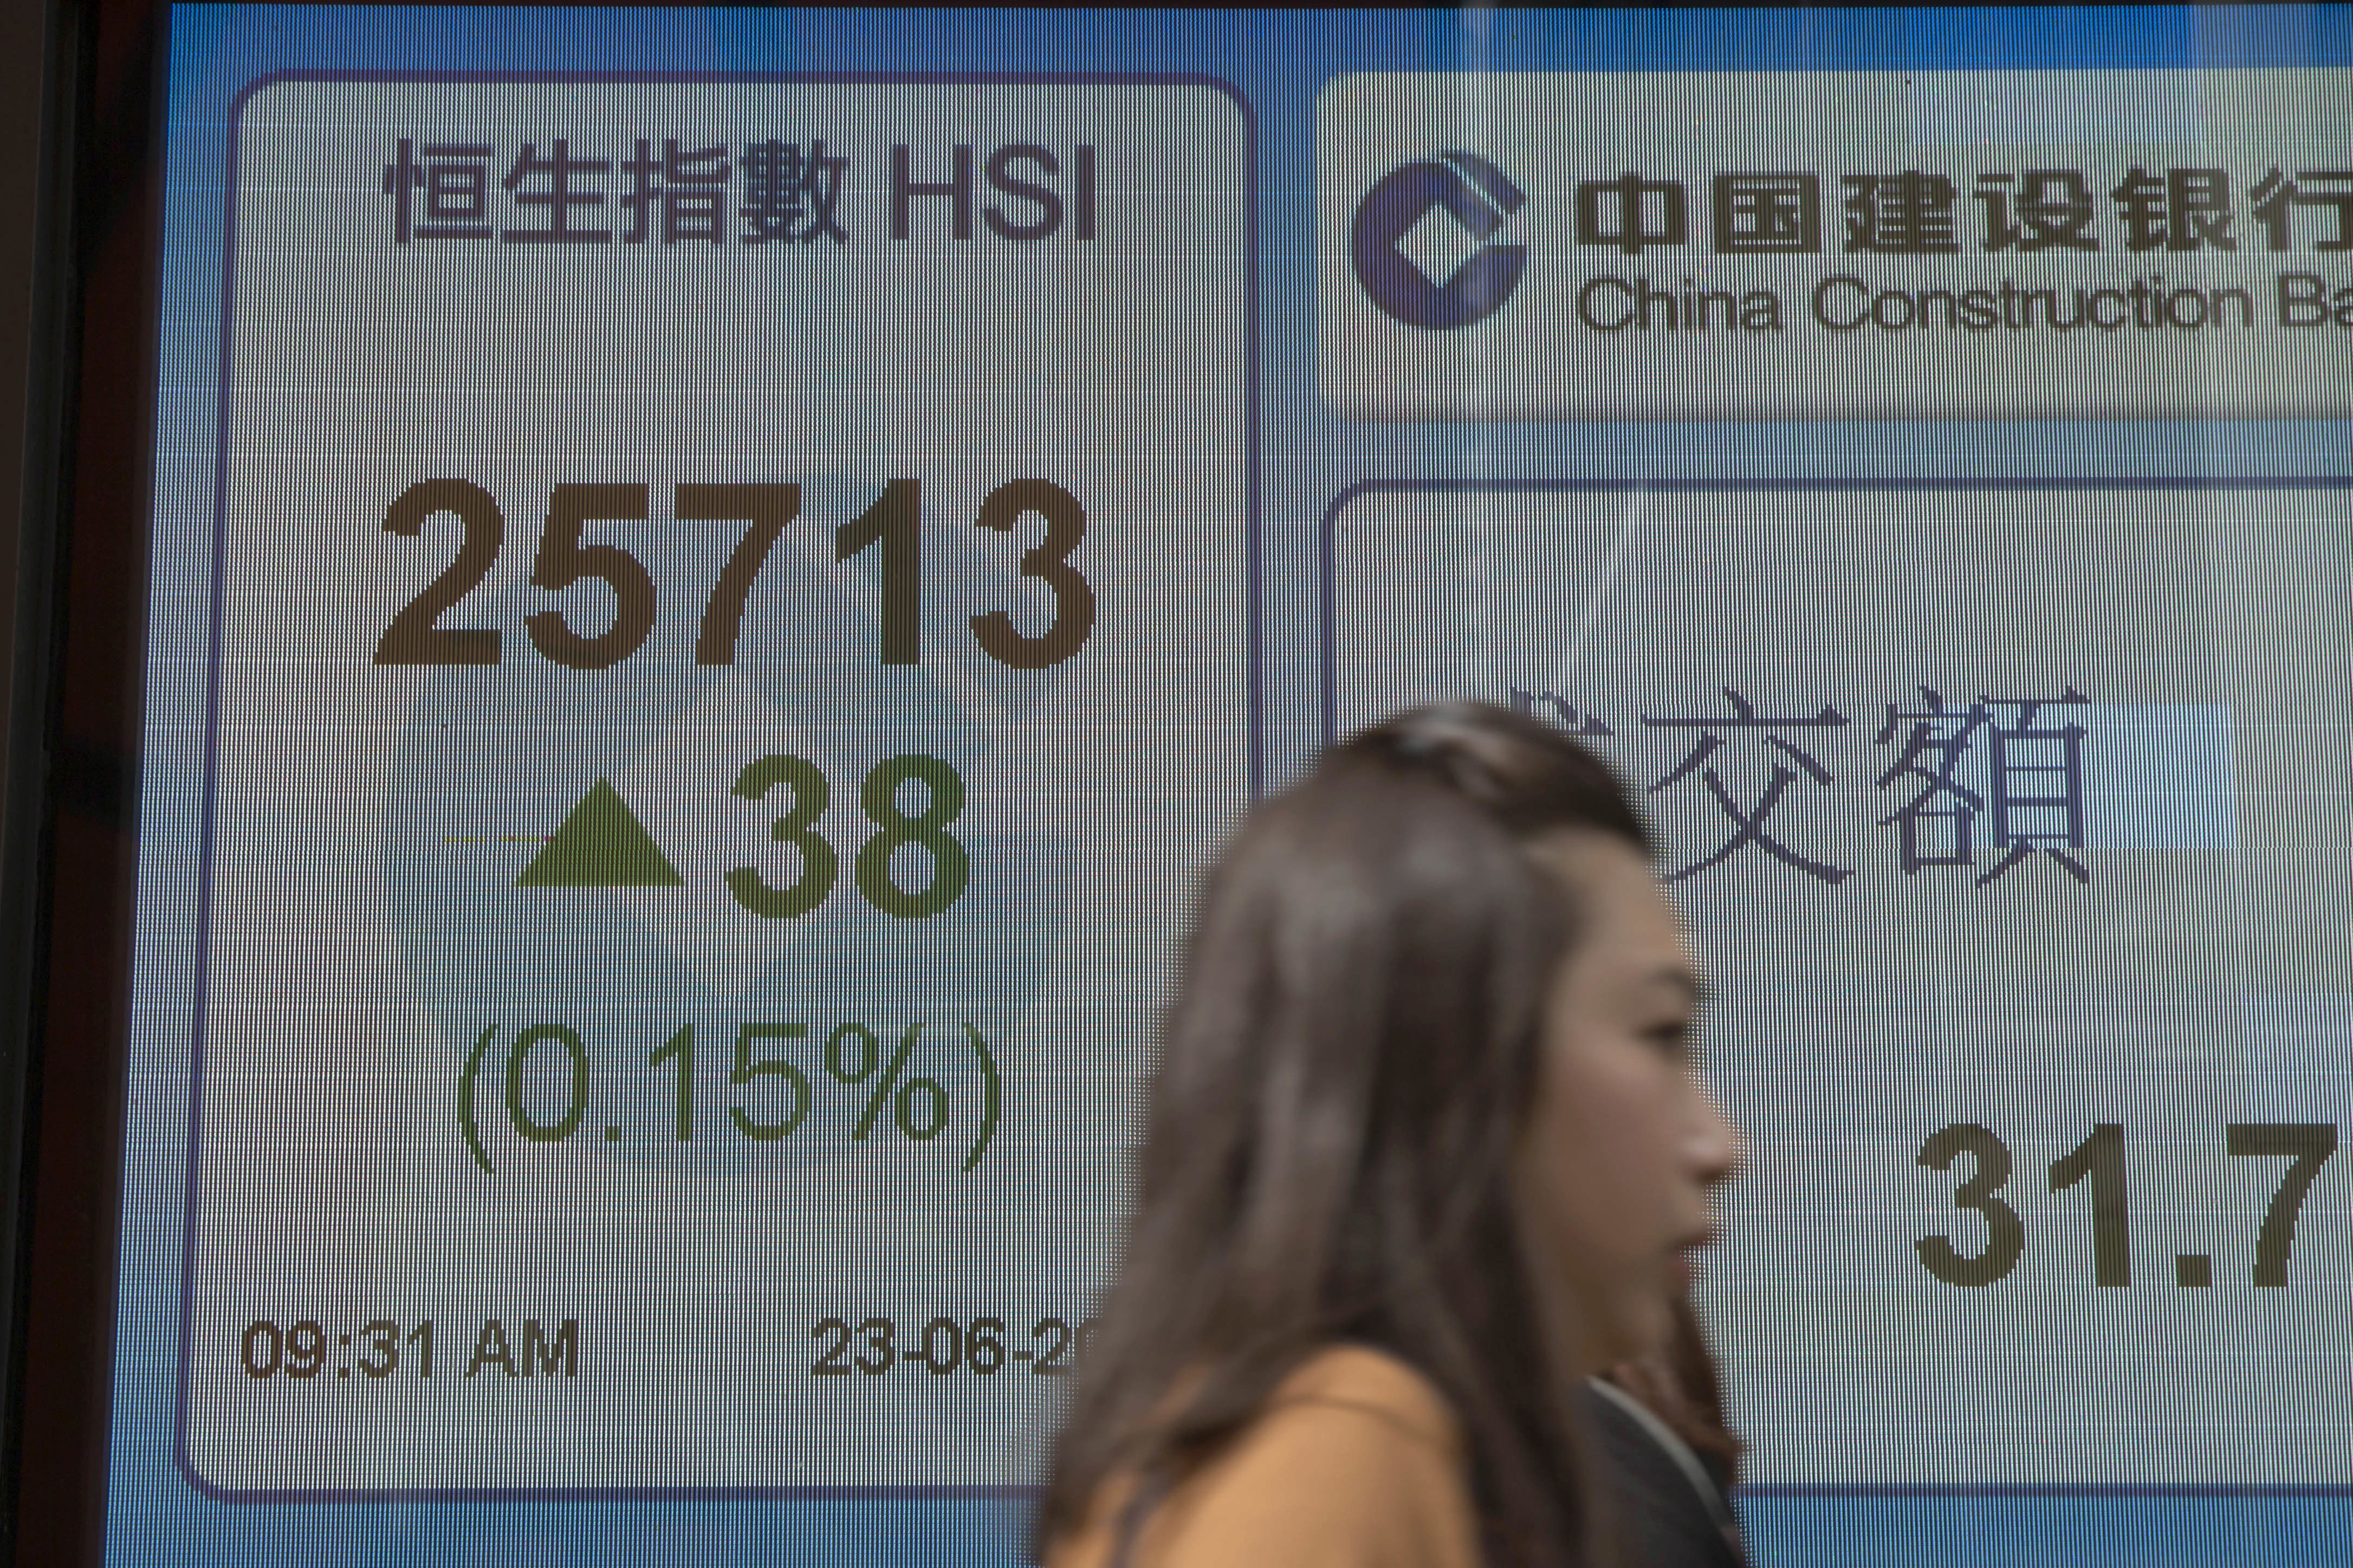 The Hang Seng Index lost 0.09pc to 27,225.89 which some investors blamed on the heavy influence of Tencent, which dropped 1.61pc. The online giant reports its interims on Wednesday. Photo: AP